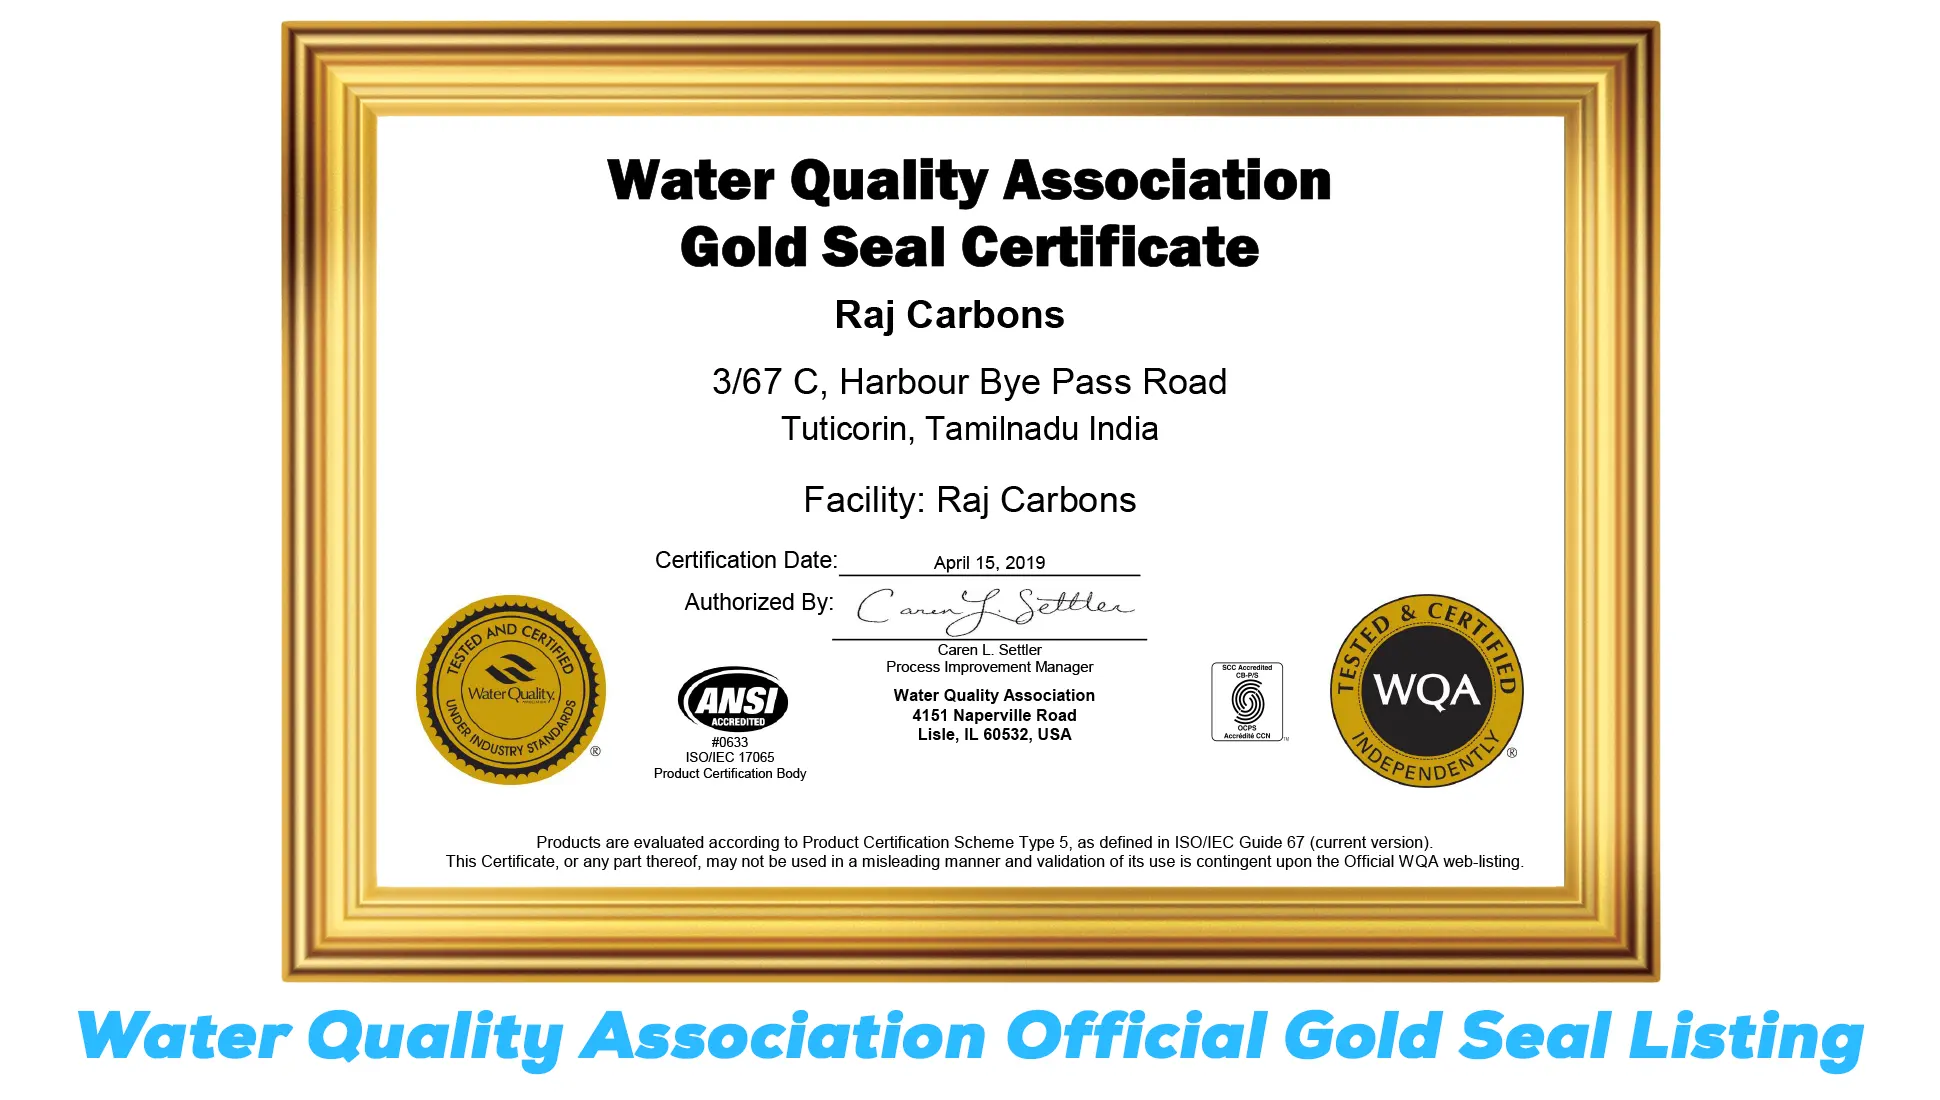 Water Quality Association Official Gold Seal Listing